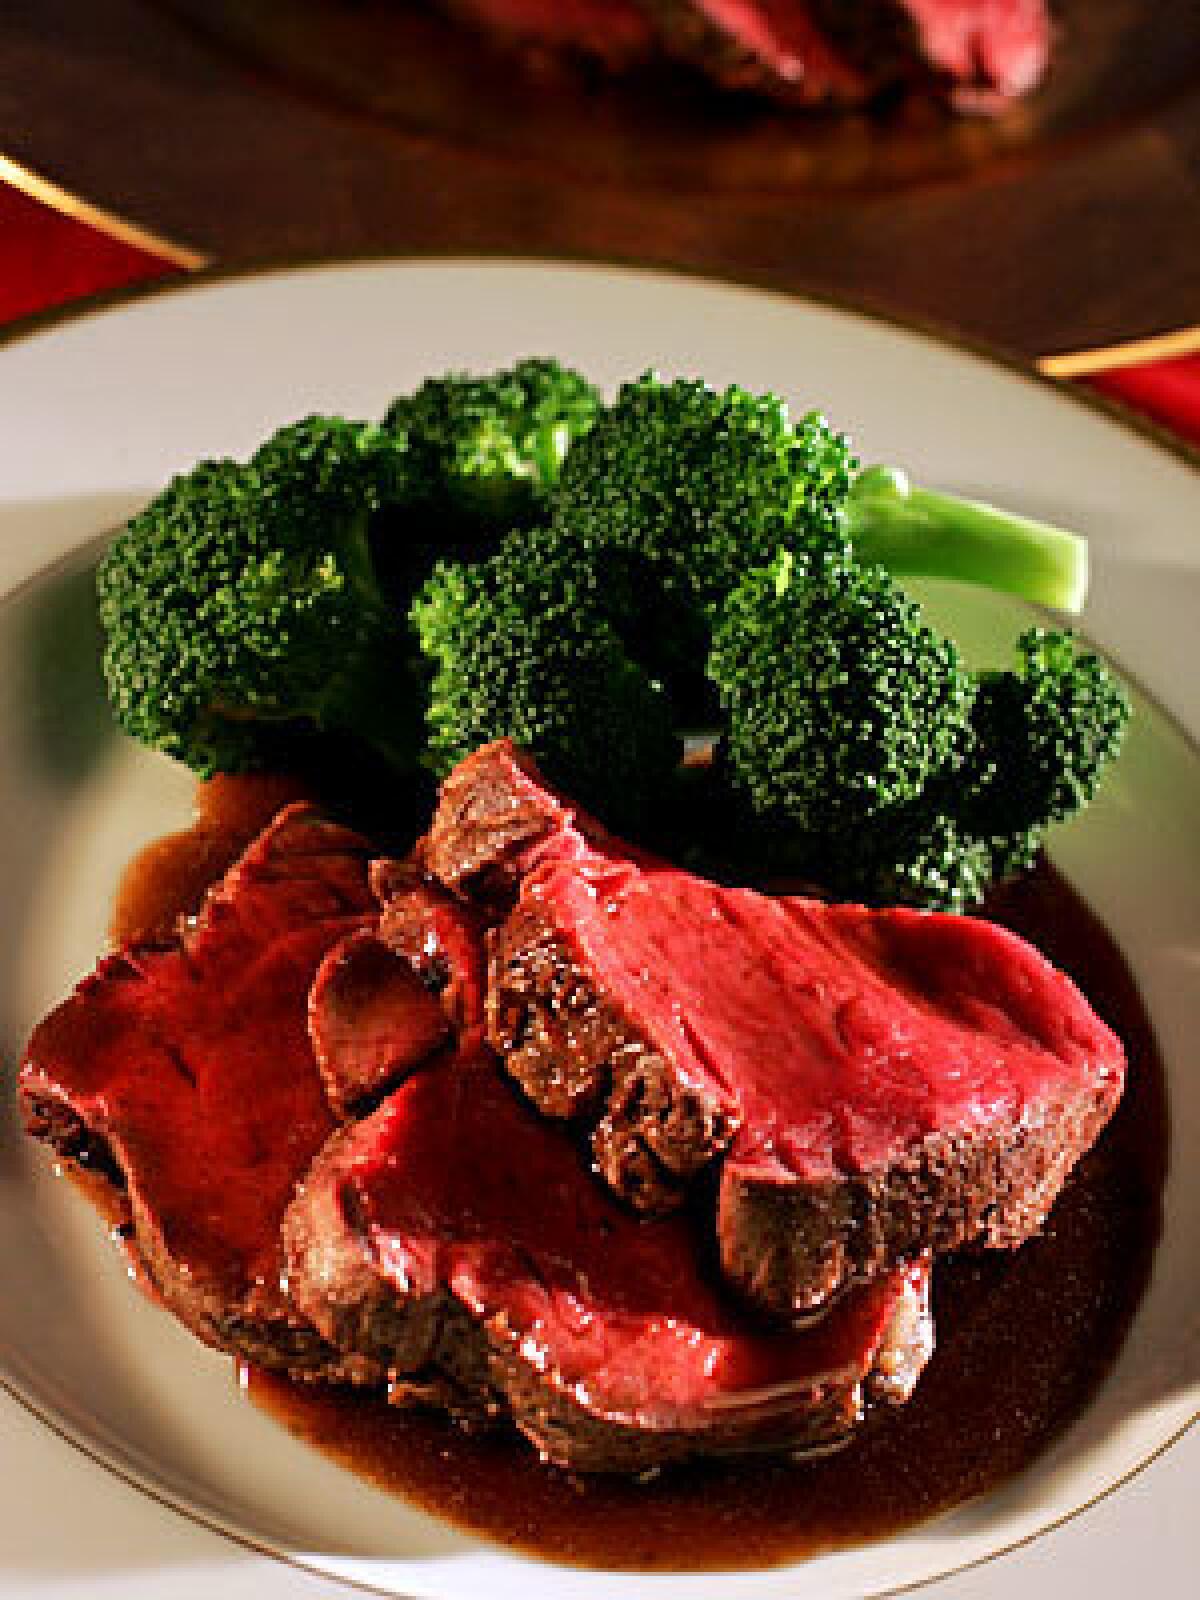 FILLET: A three-peppercorn sauce makes this dish shine.